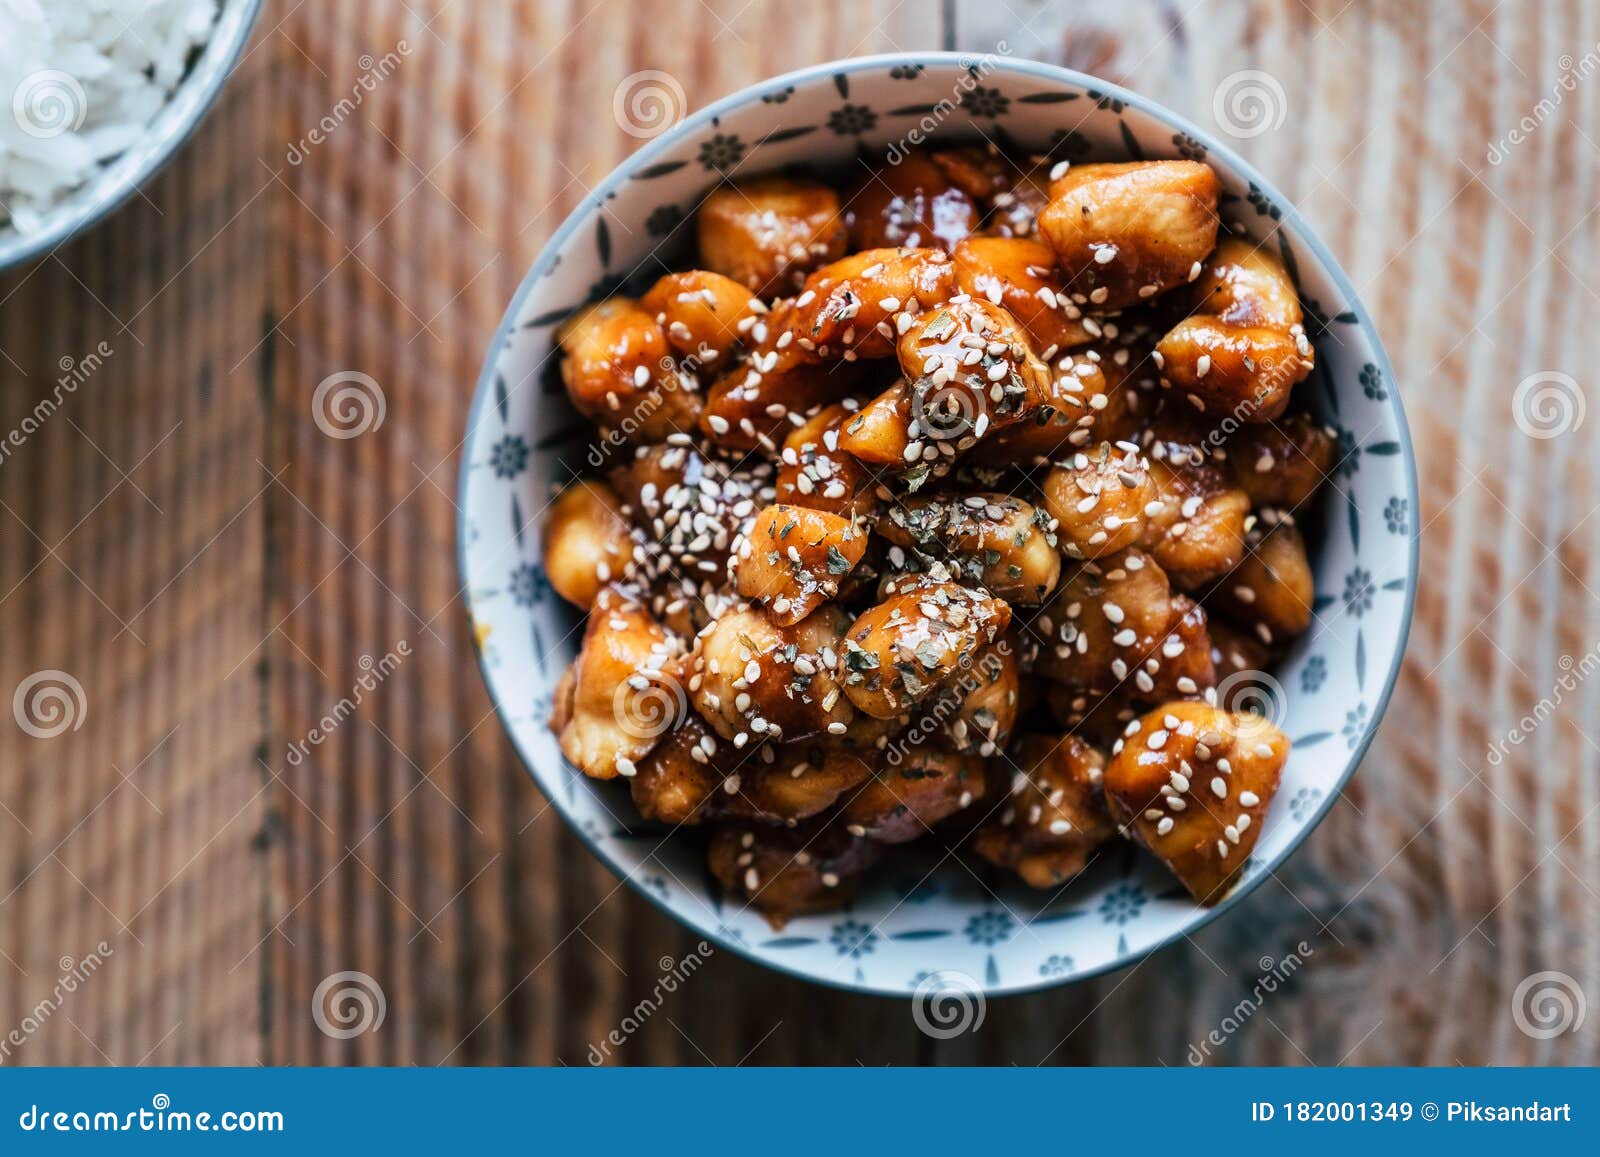 Caramelized Teriyaki Chicken with Sesame Seeds in a Bowl Stock Image ...